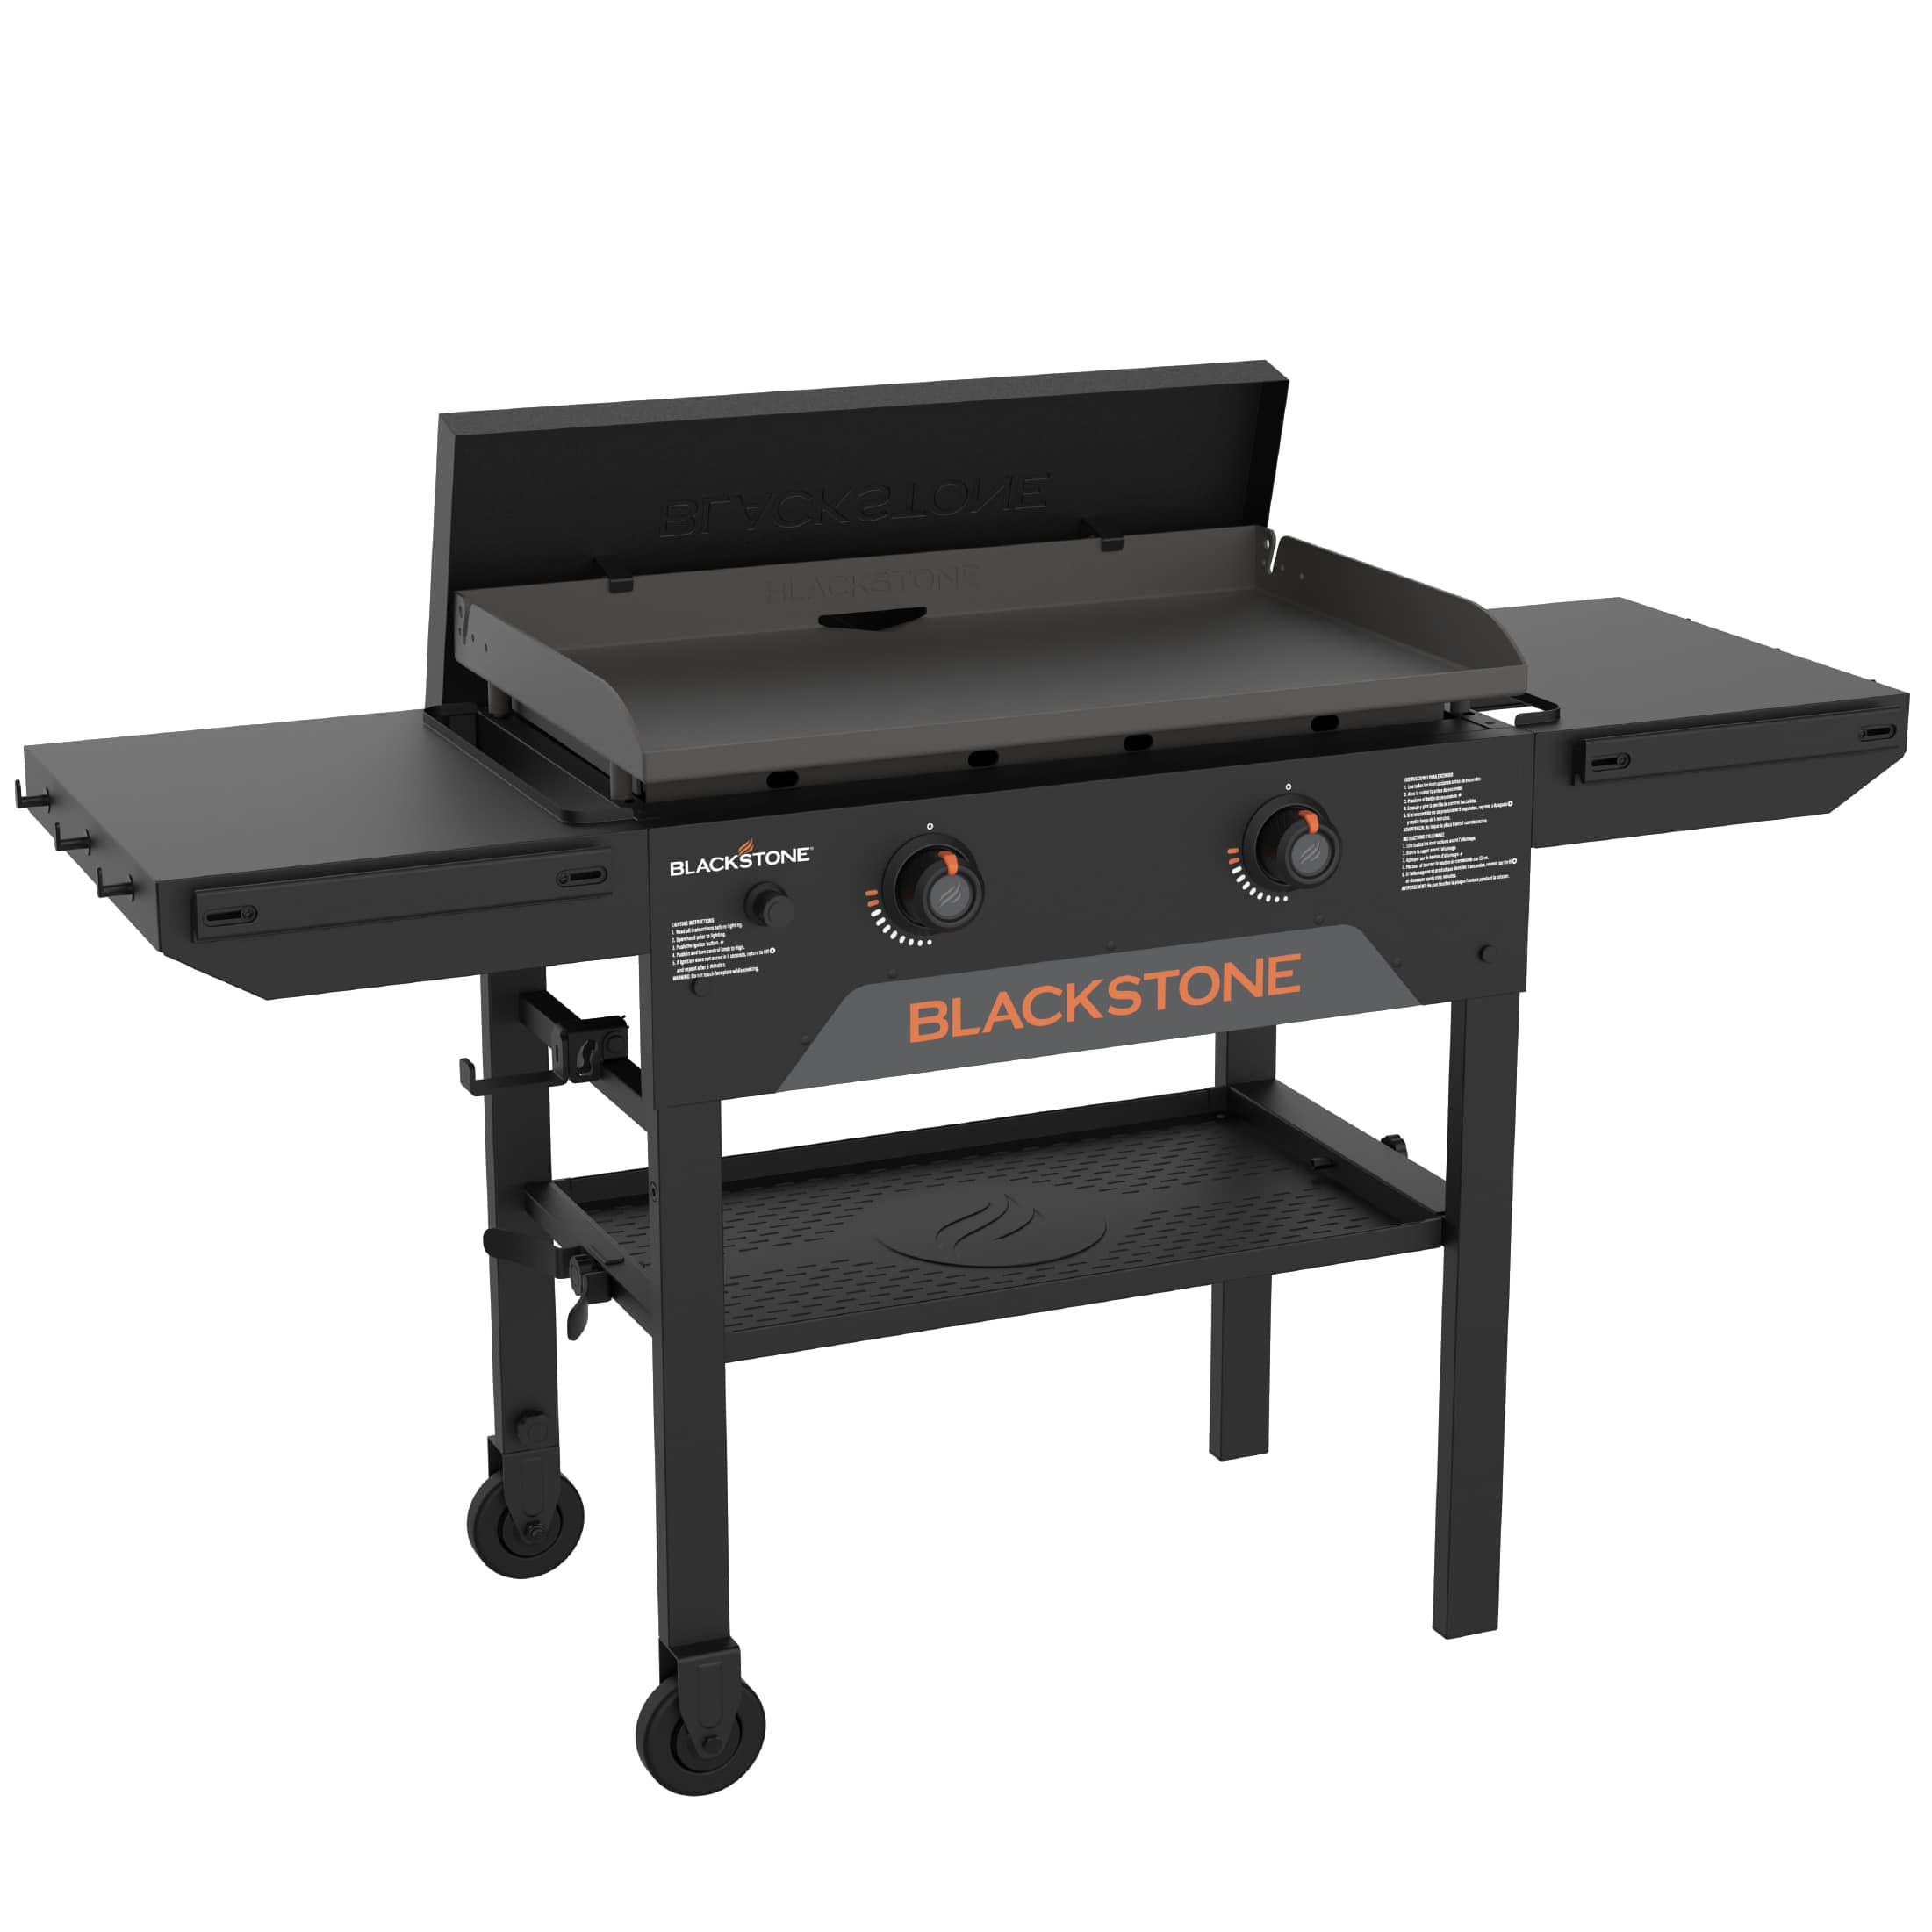 Blackstone 28 inch griddle with hardcover 2207